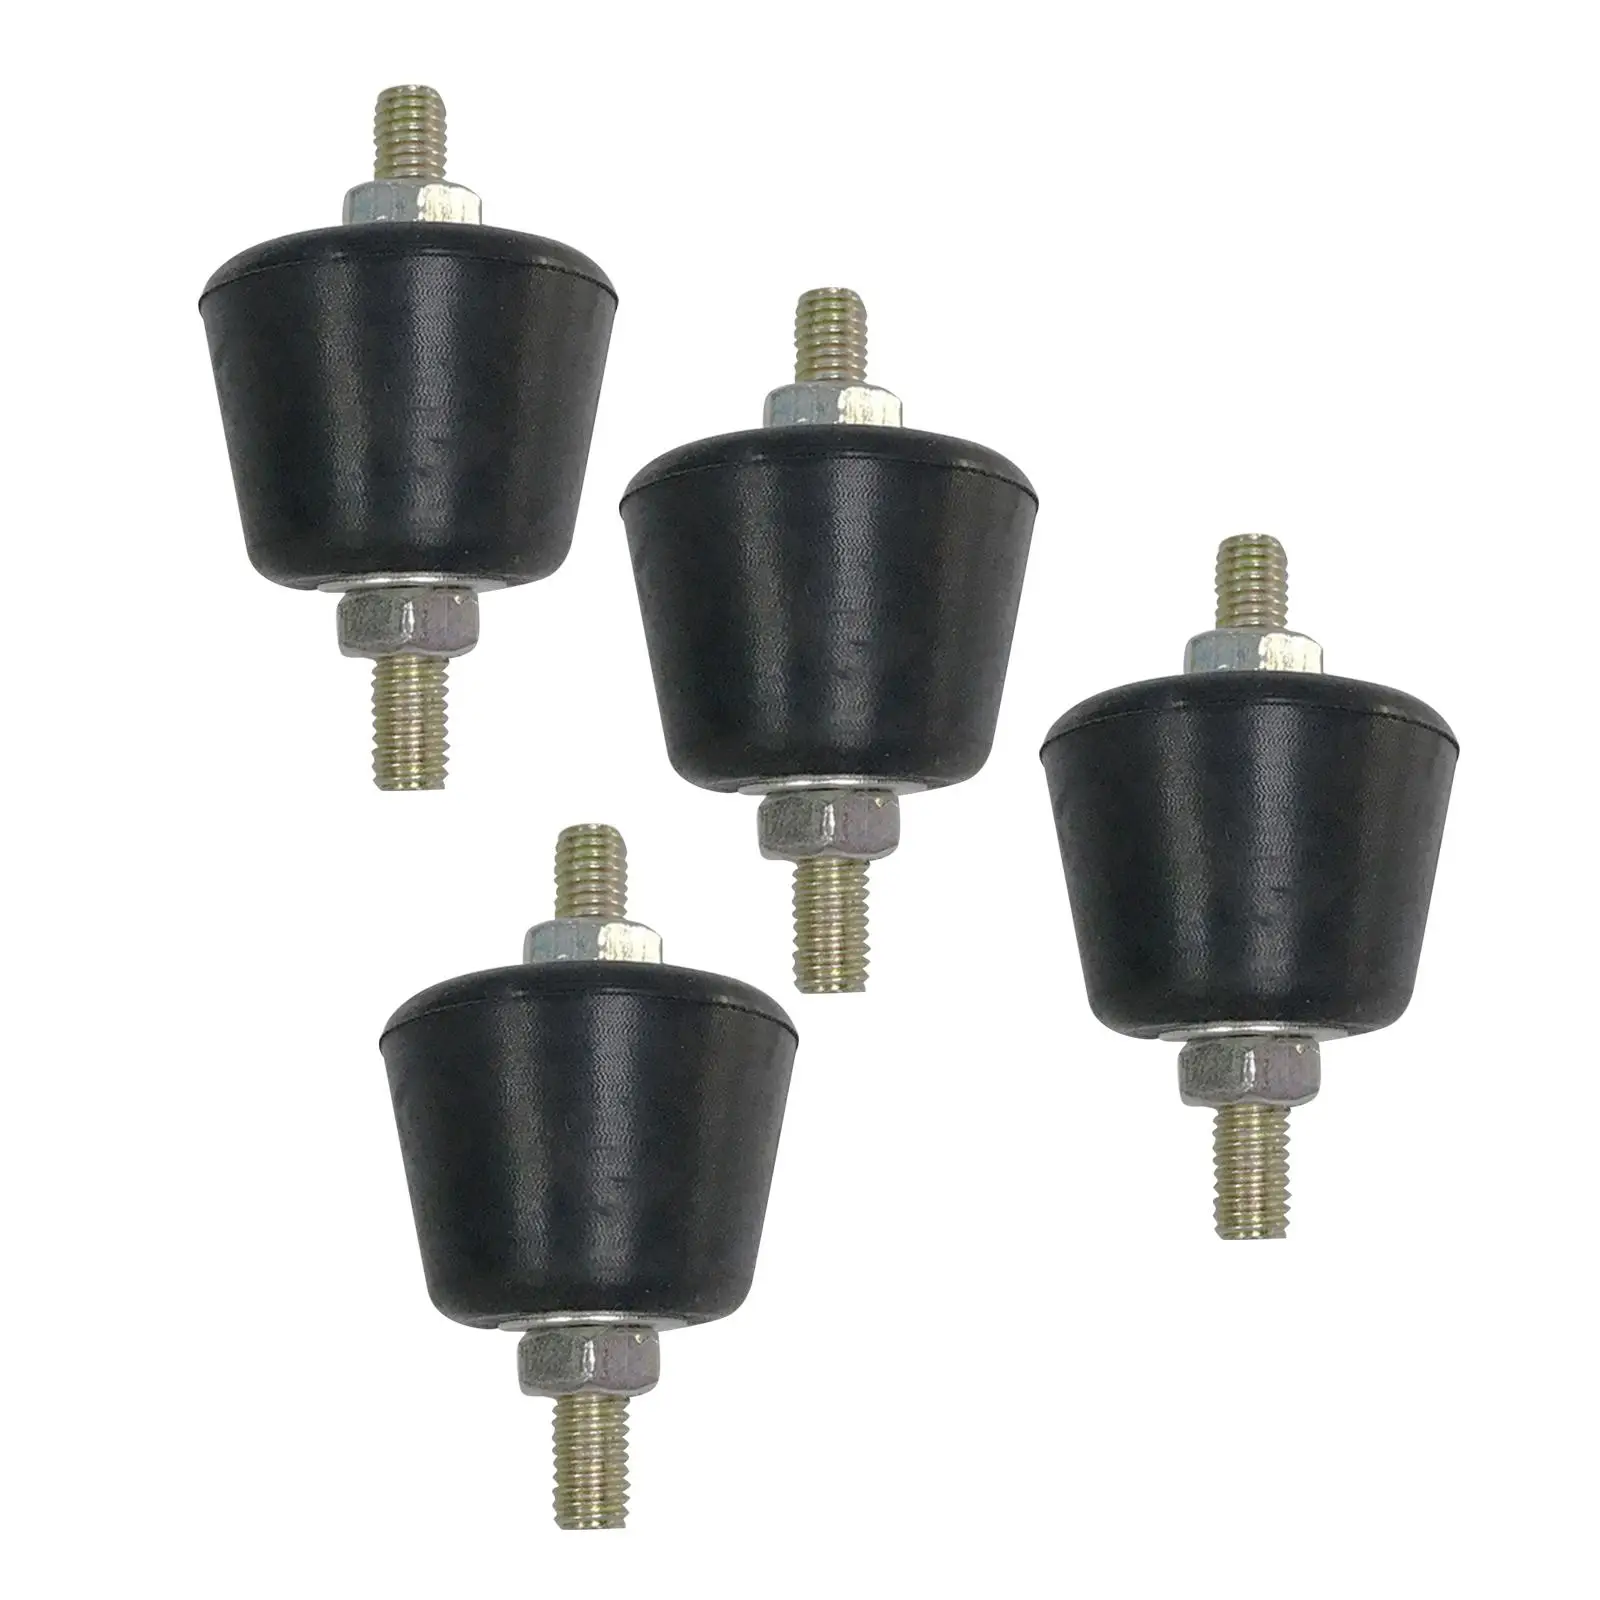 4Pcs Rubber Isolator Mounting Shock Absorption Vibration Rubber Isolator for Air Conditioner Outdoor Unit Roofs Balcony